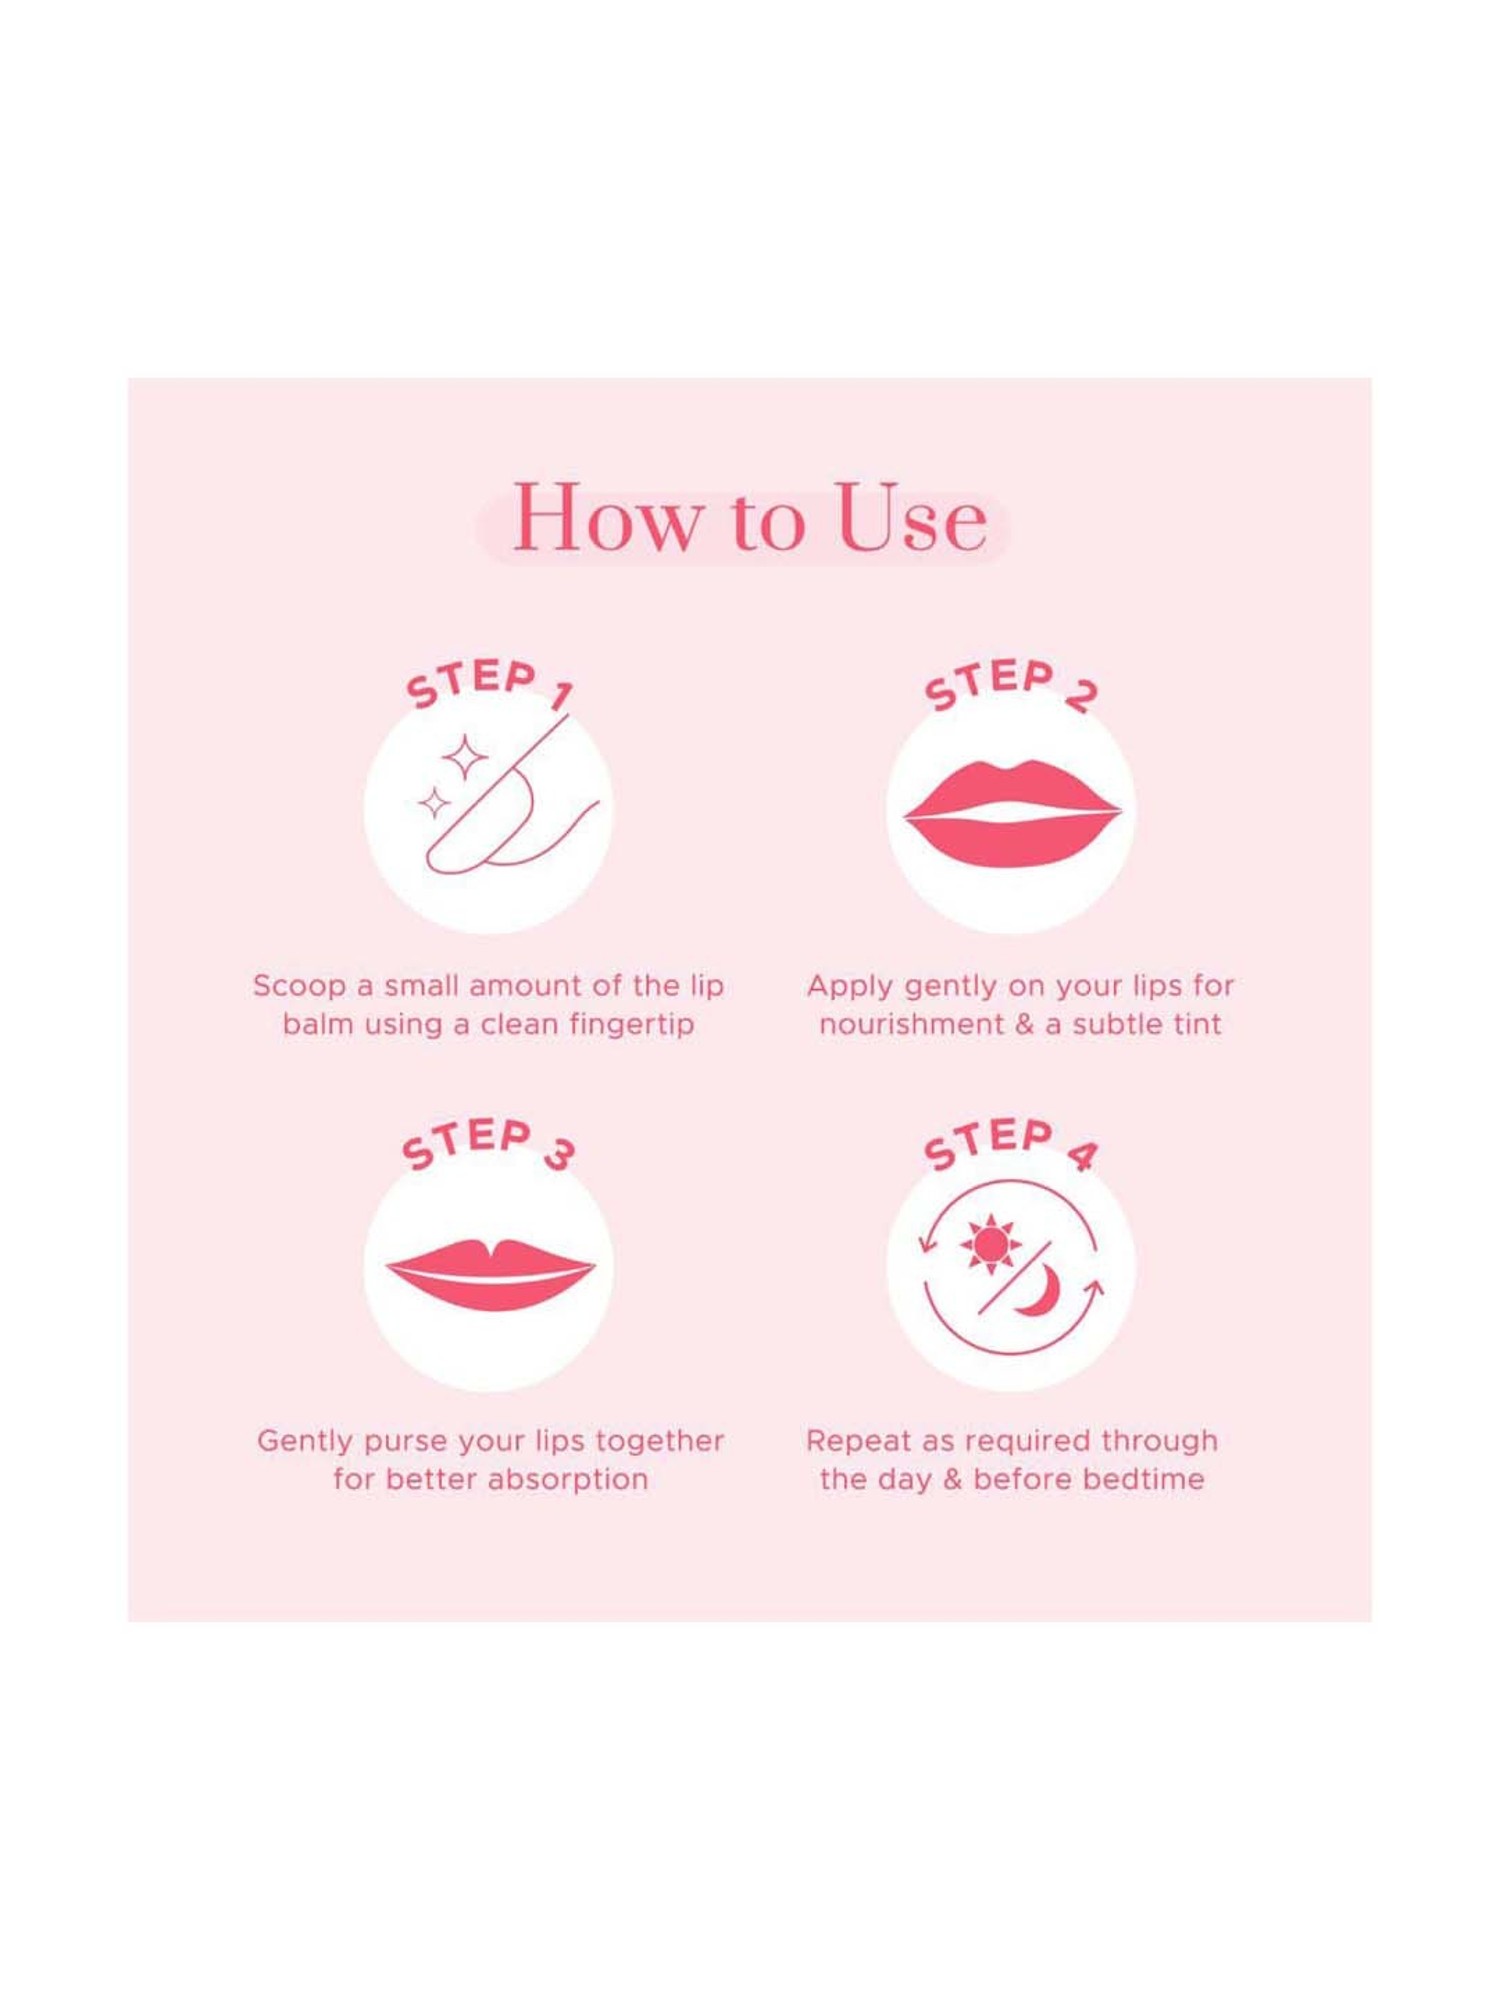 How to apply lipstick like a pro: Step-by-step guide